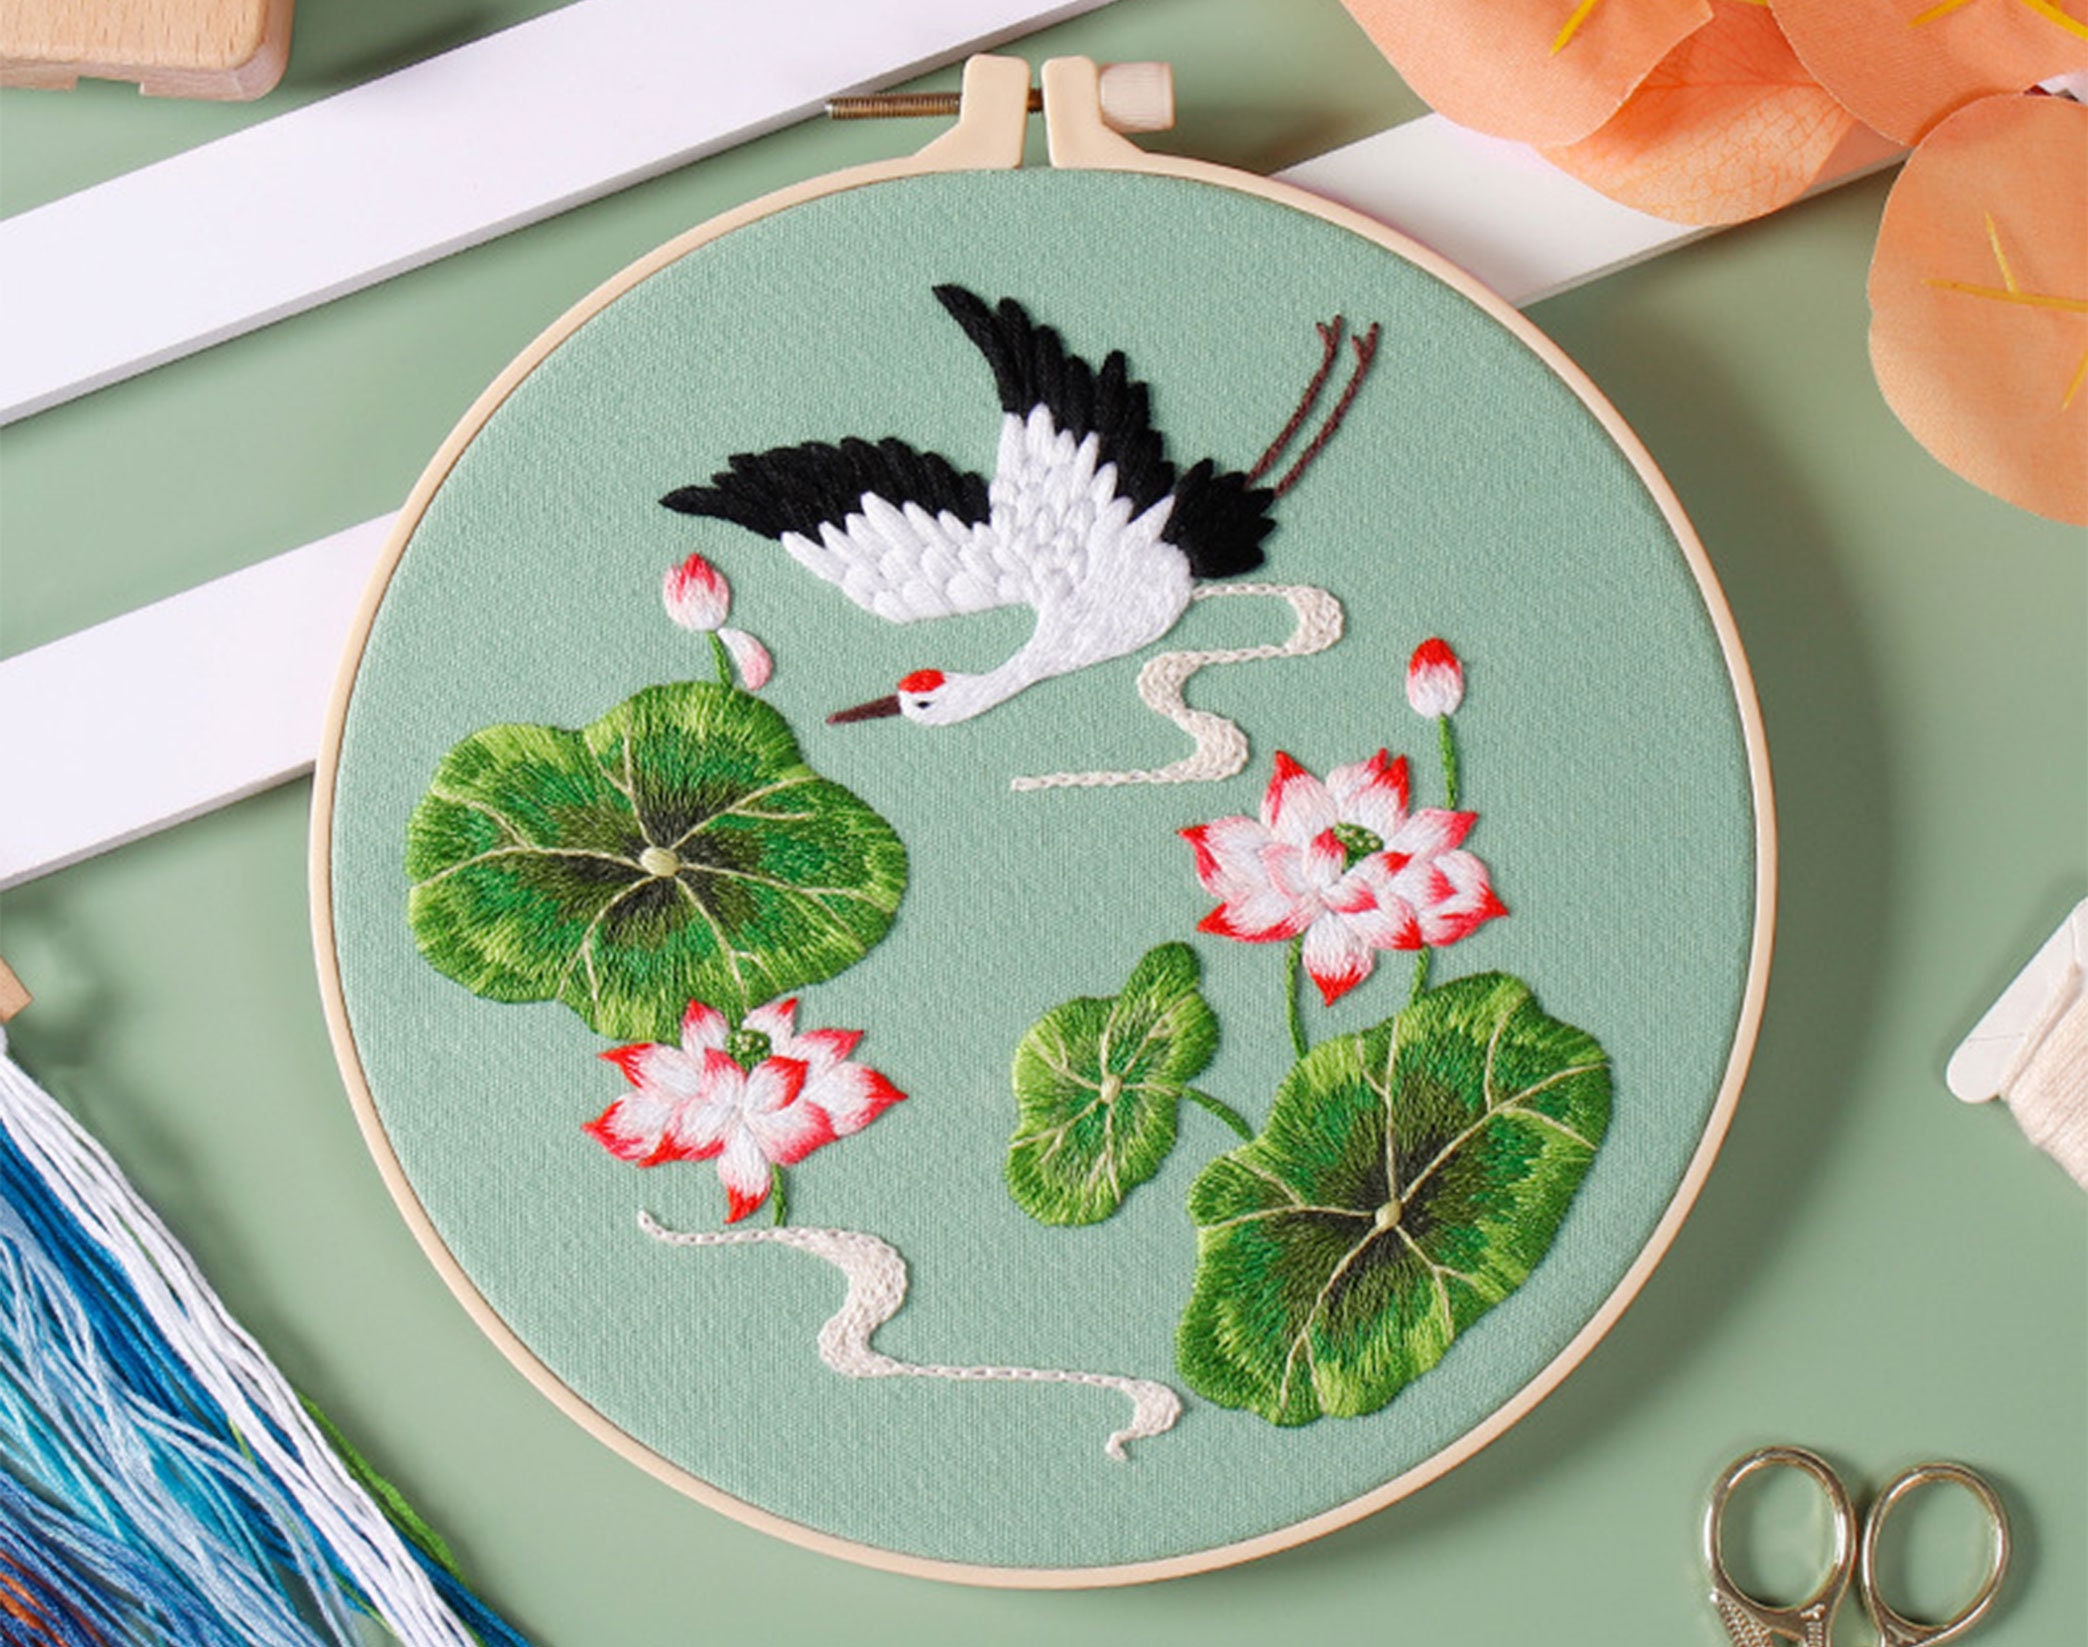 Fairy Crane Embroidery Kits for Beginners Landscape Embroidery English  Manual